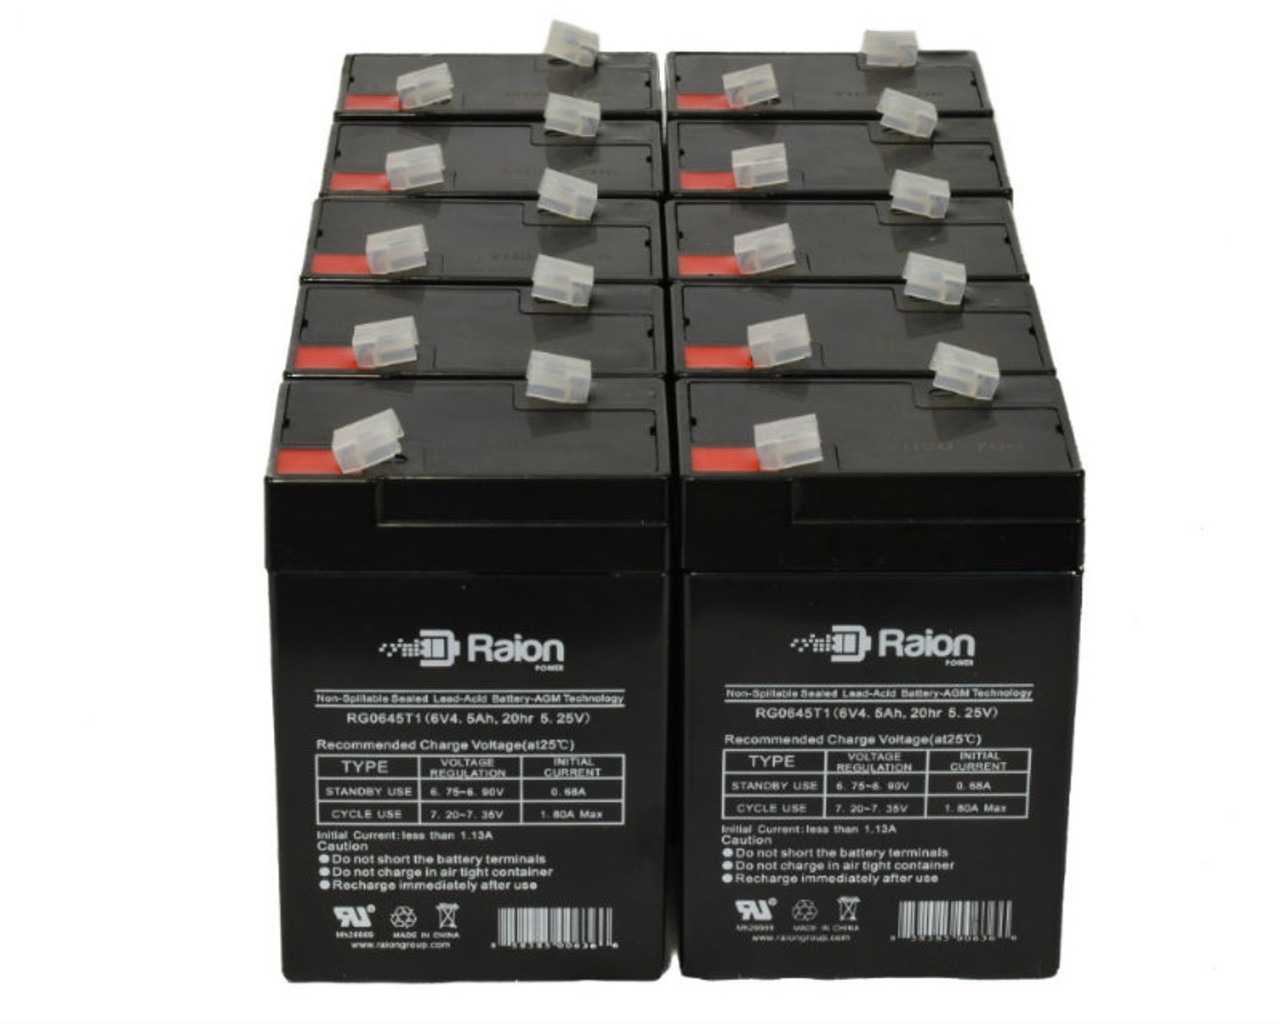 Raion Power 6 Volt 4.5Ah RG0645T1 Replacement Battery for R&D 5269 - 10 Pack